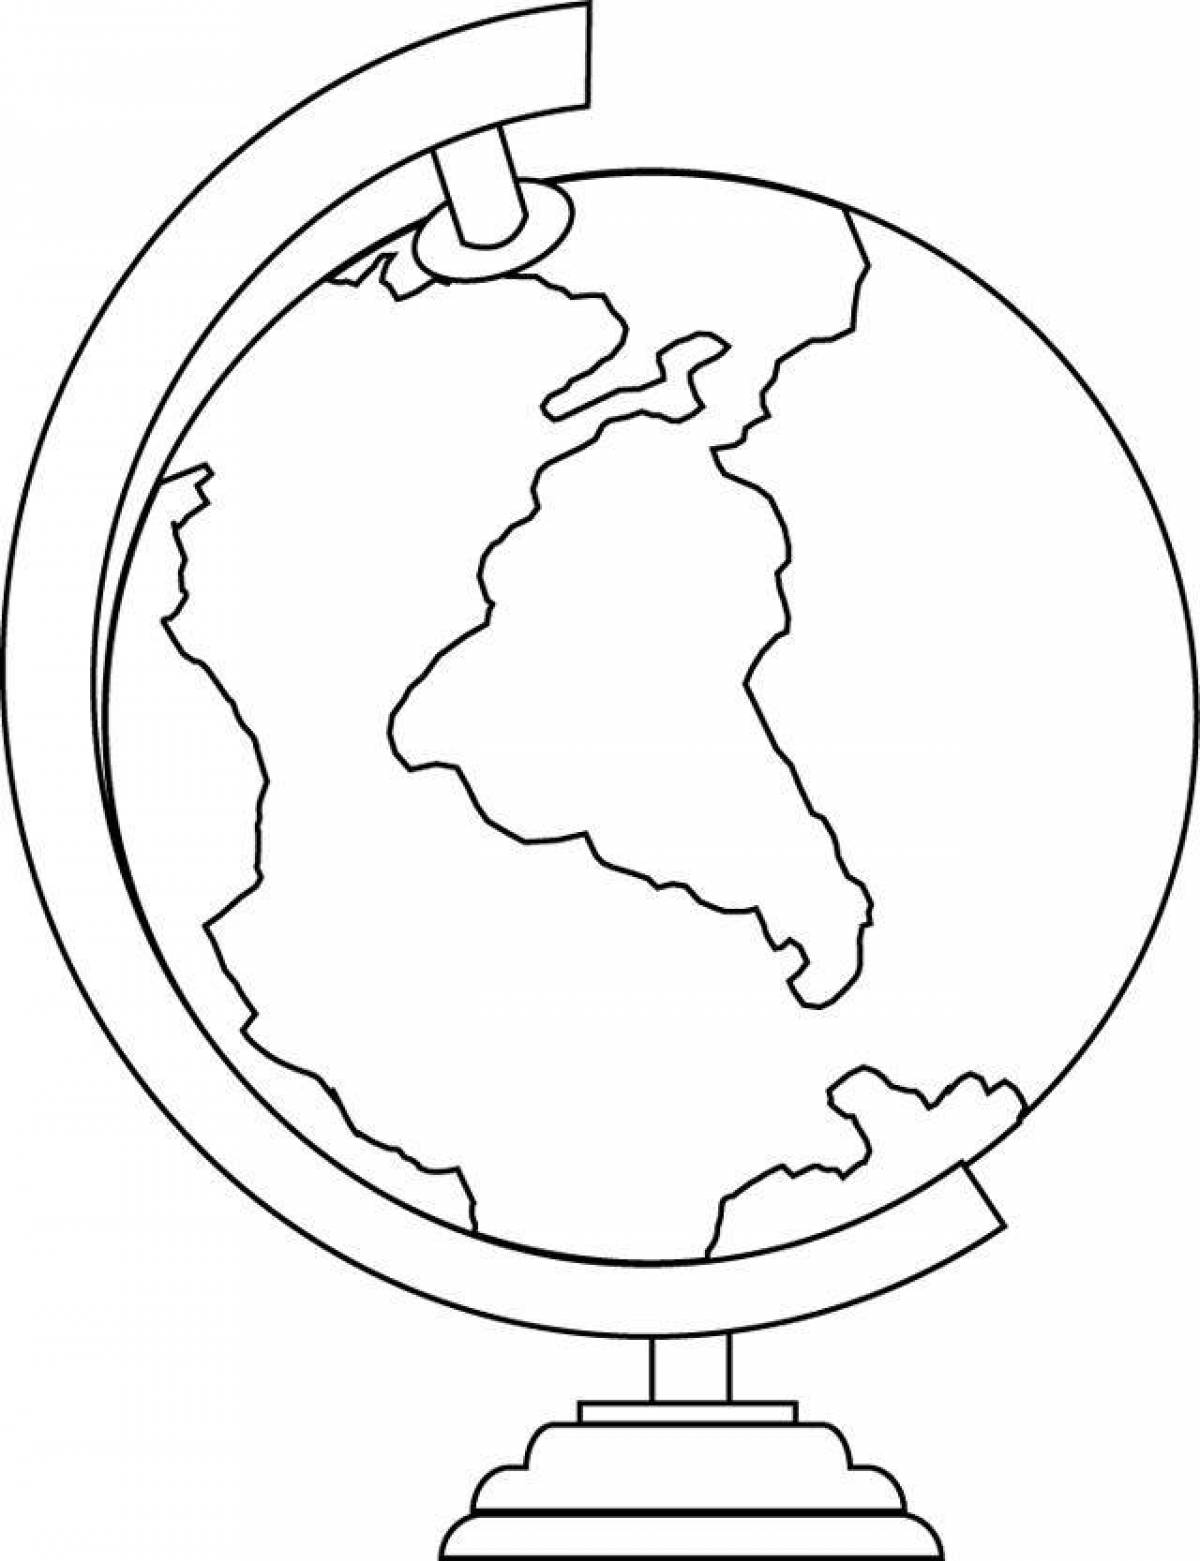 A striking globe coloring page